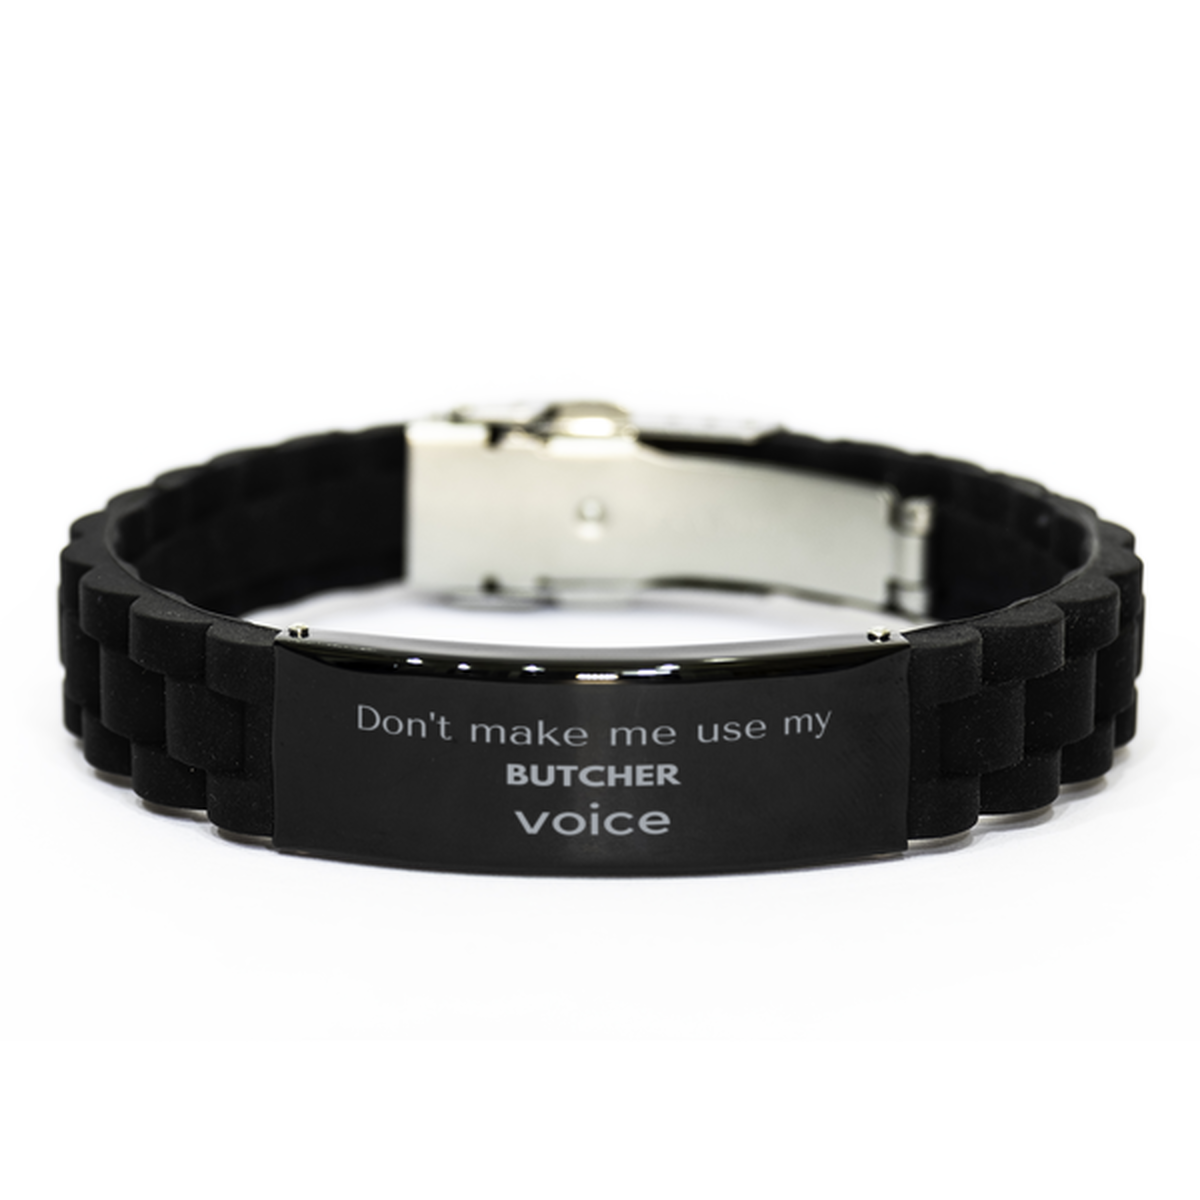 Don't make me use my Butcher voice, Sarcasm Butcher Gifts, Christmas Butcher Black Glidelock Clasp Bracelet Birthday Unique Gifts For Butcher Coworkers, Men, Women, Colleague, Friends